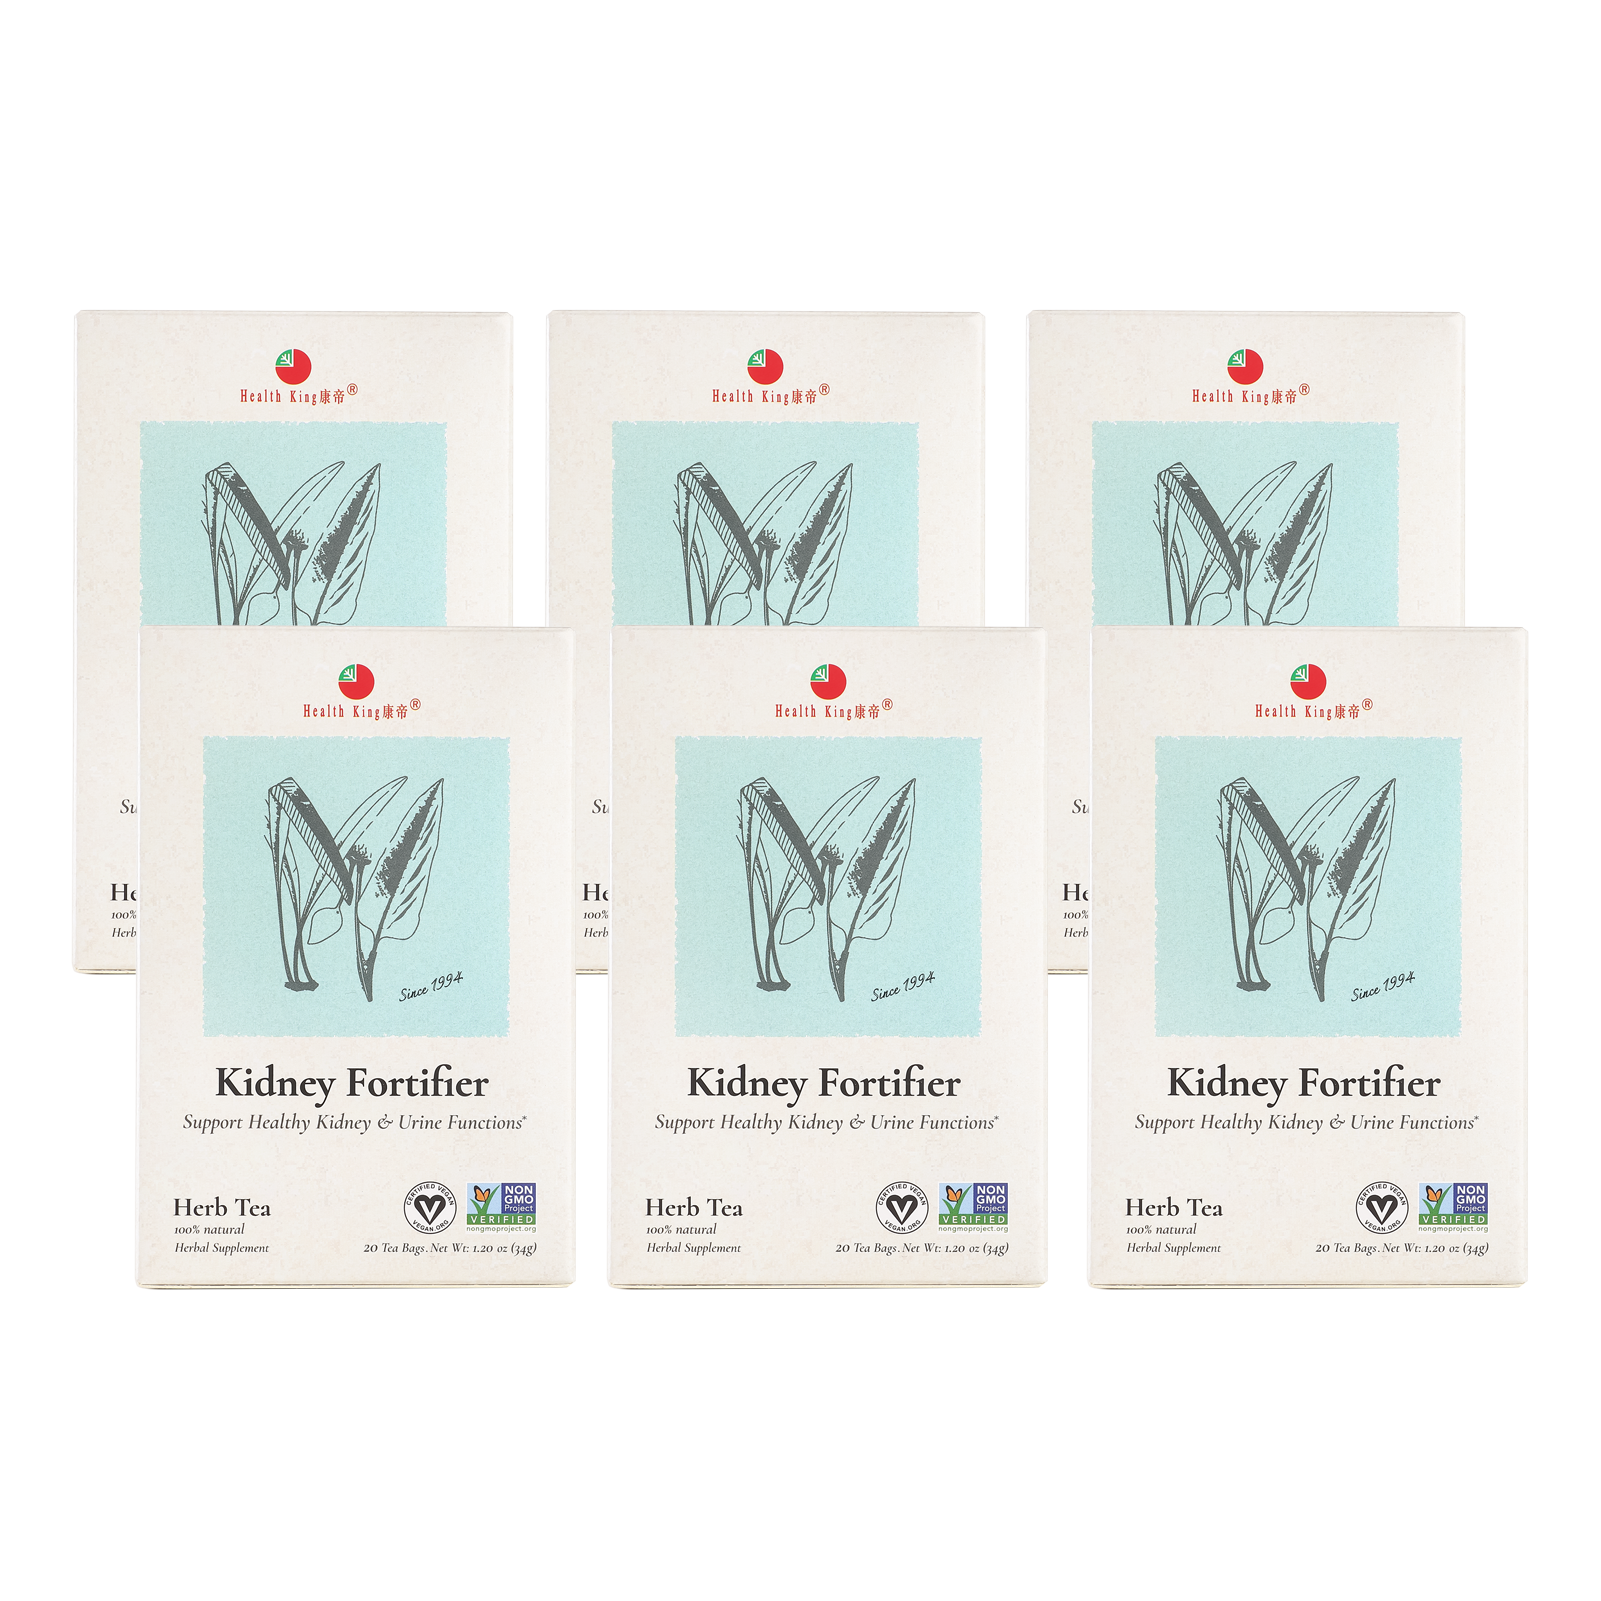 Six boxes of Kidney Fortifier Herb Tea for kidney function support